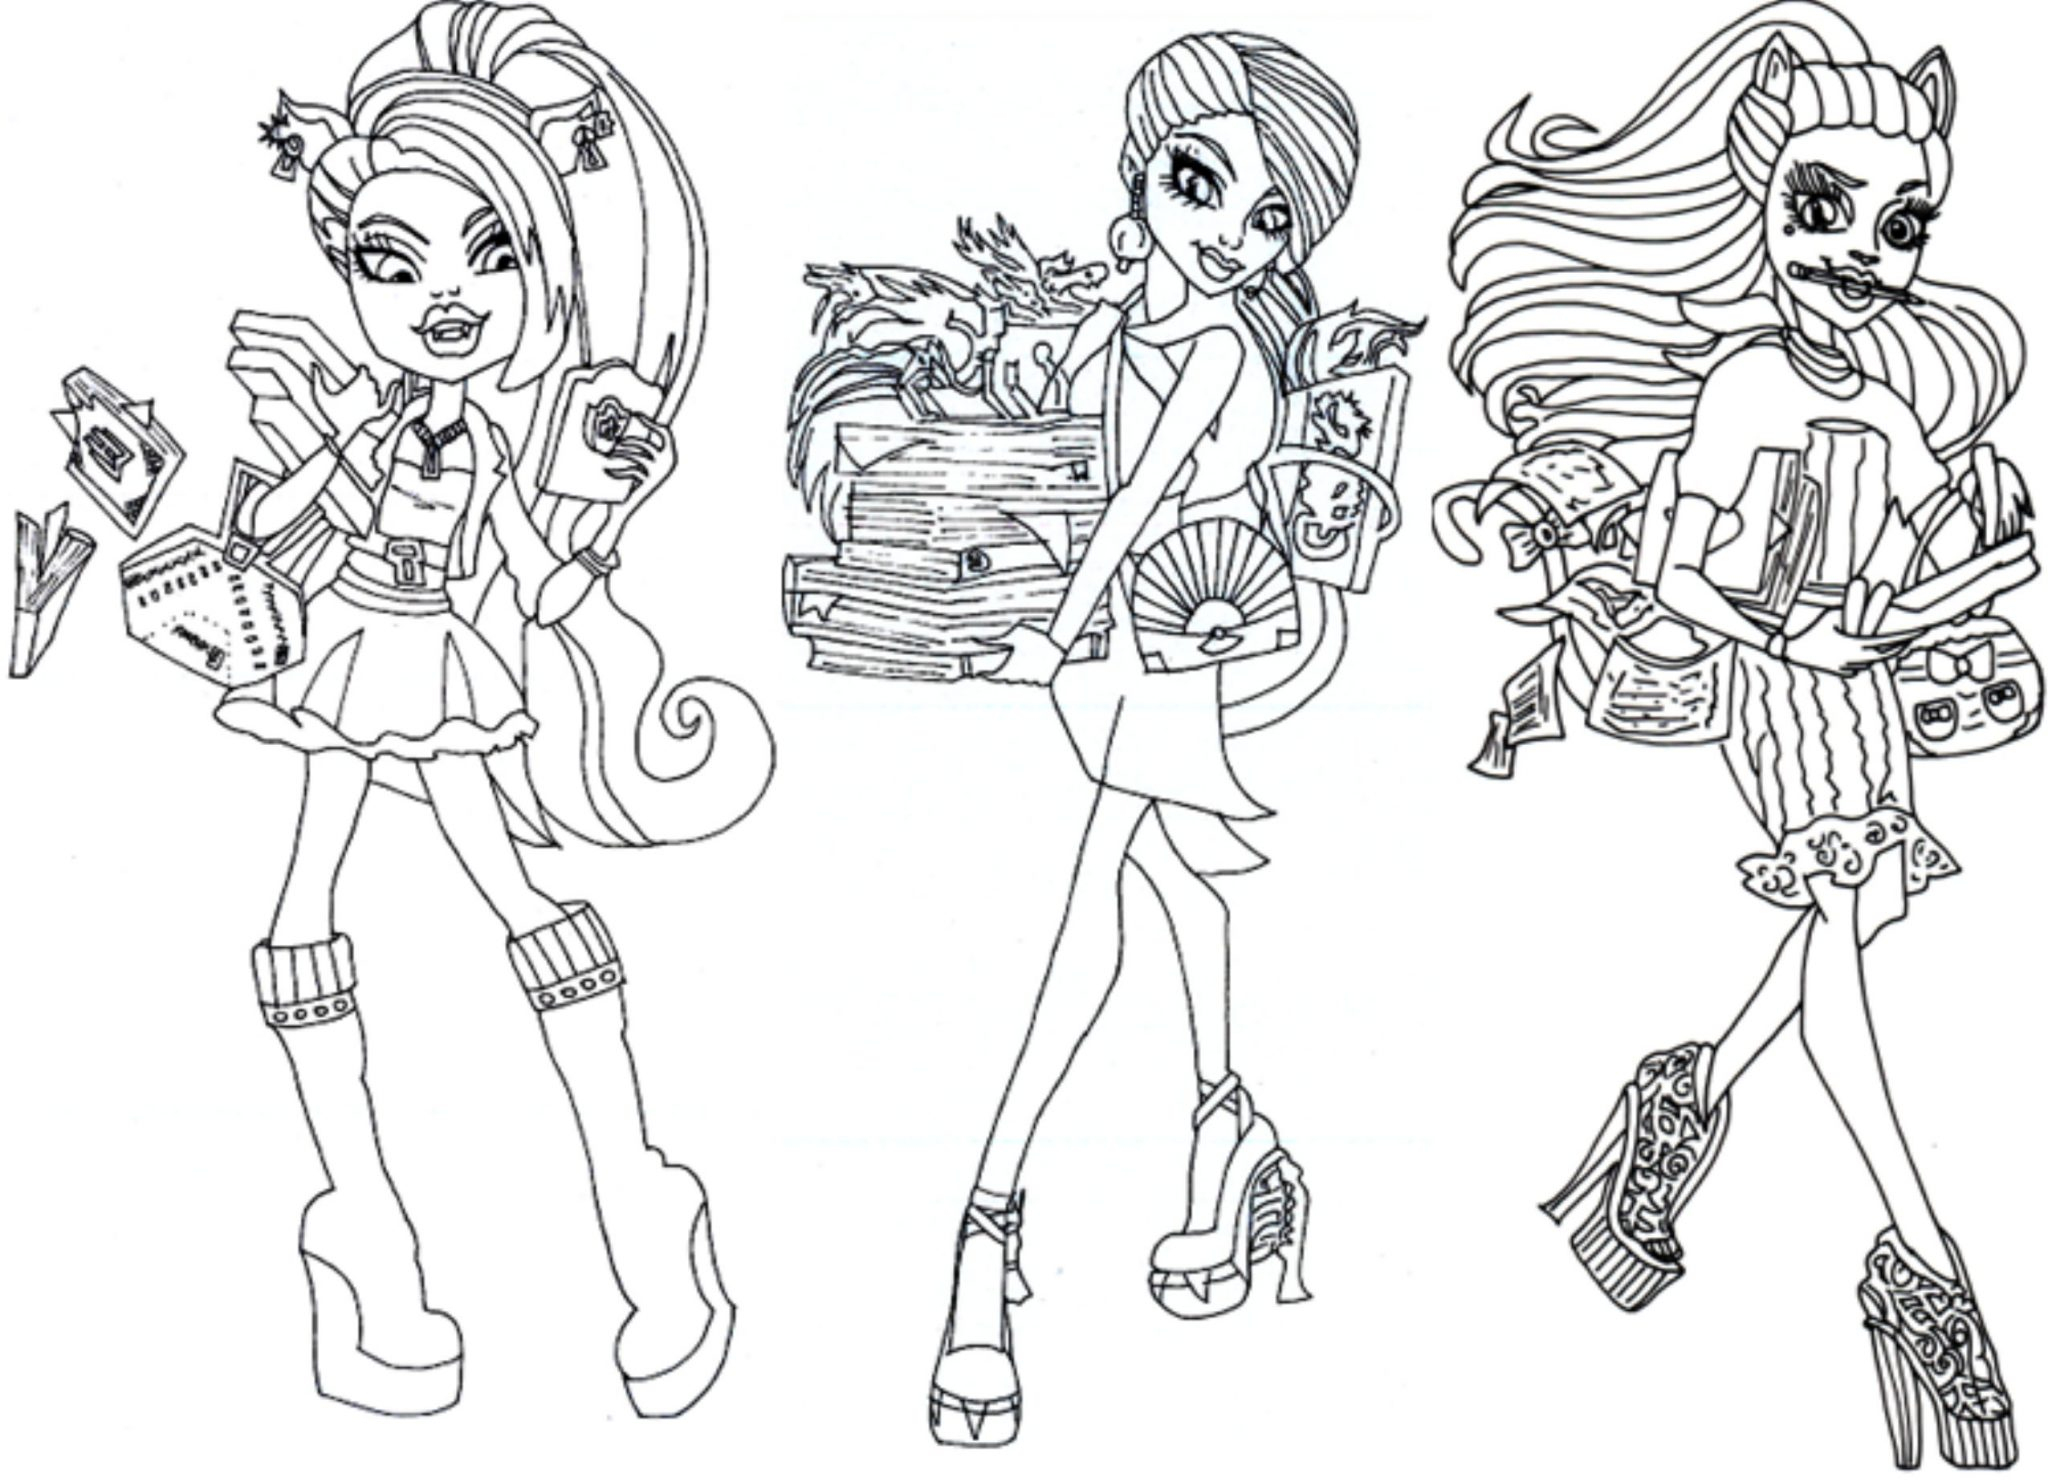 Monster-High-Coloring-Page-Collection   Bestappsforkids concernant Coloriages Monster High 